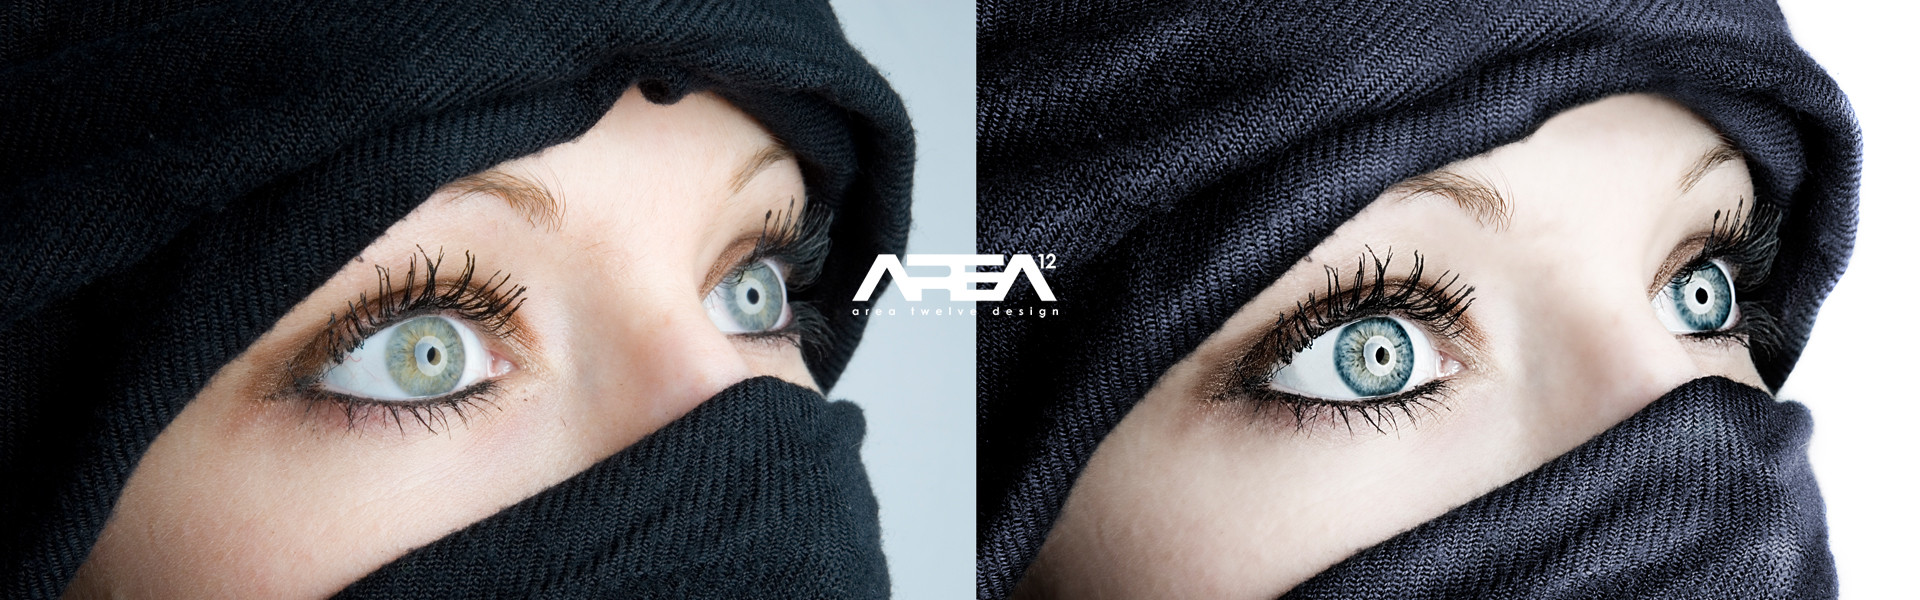 before_after_eyes_woman